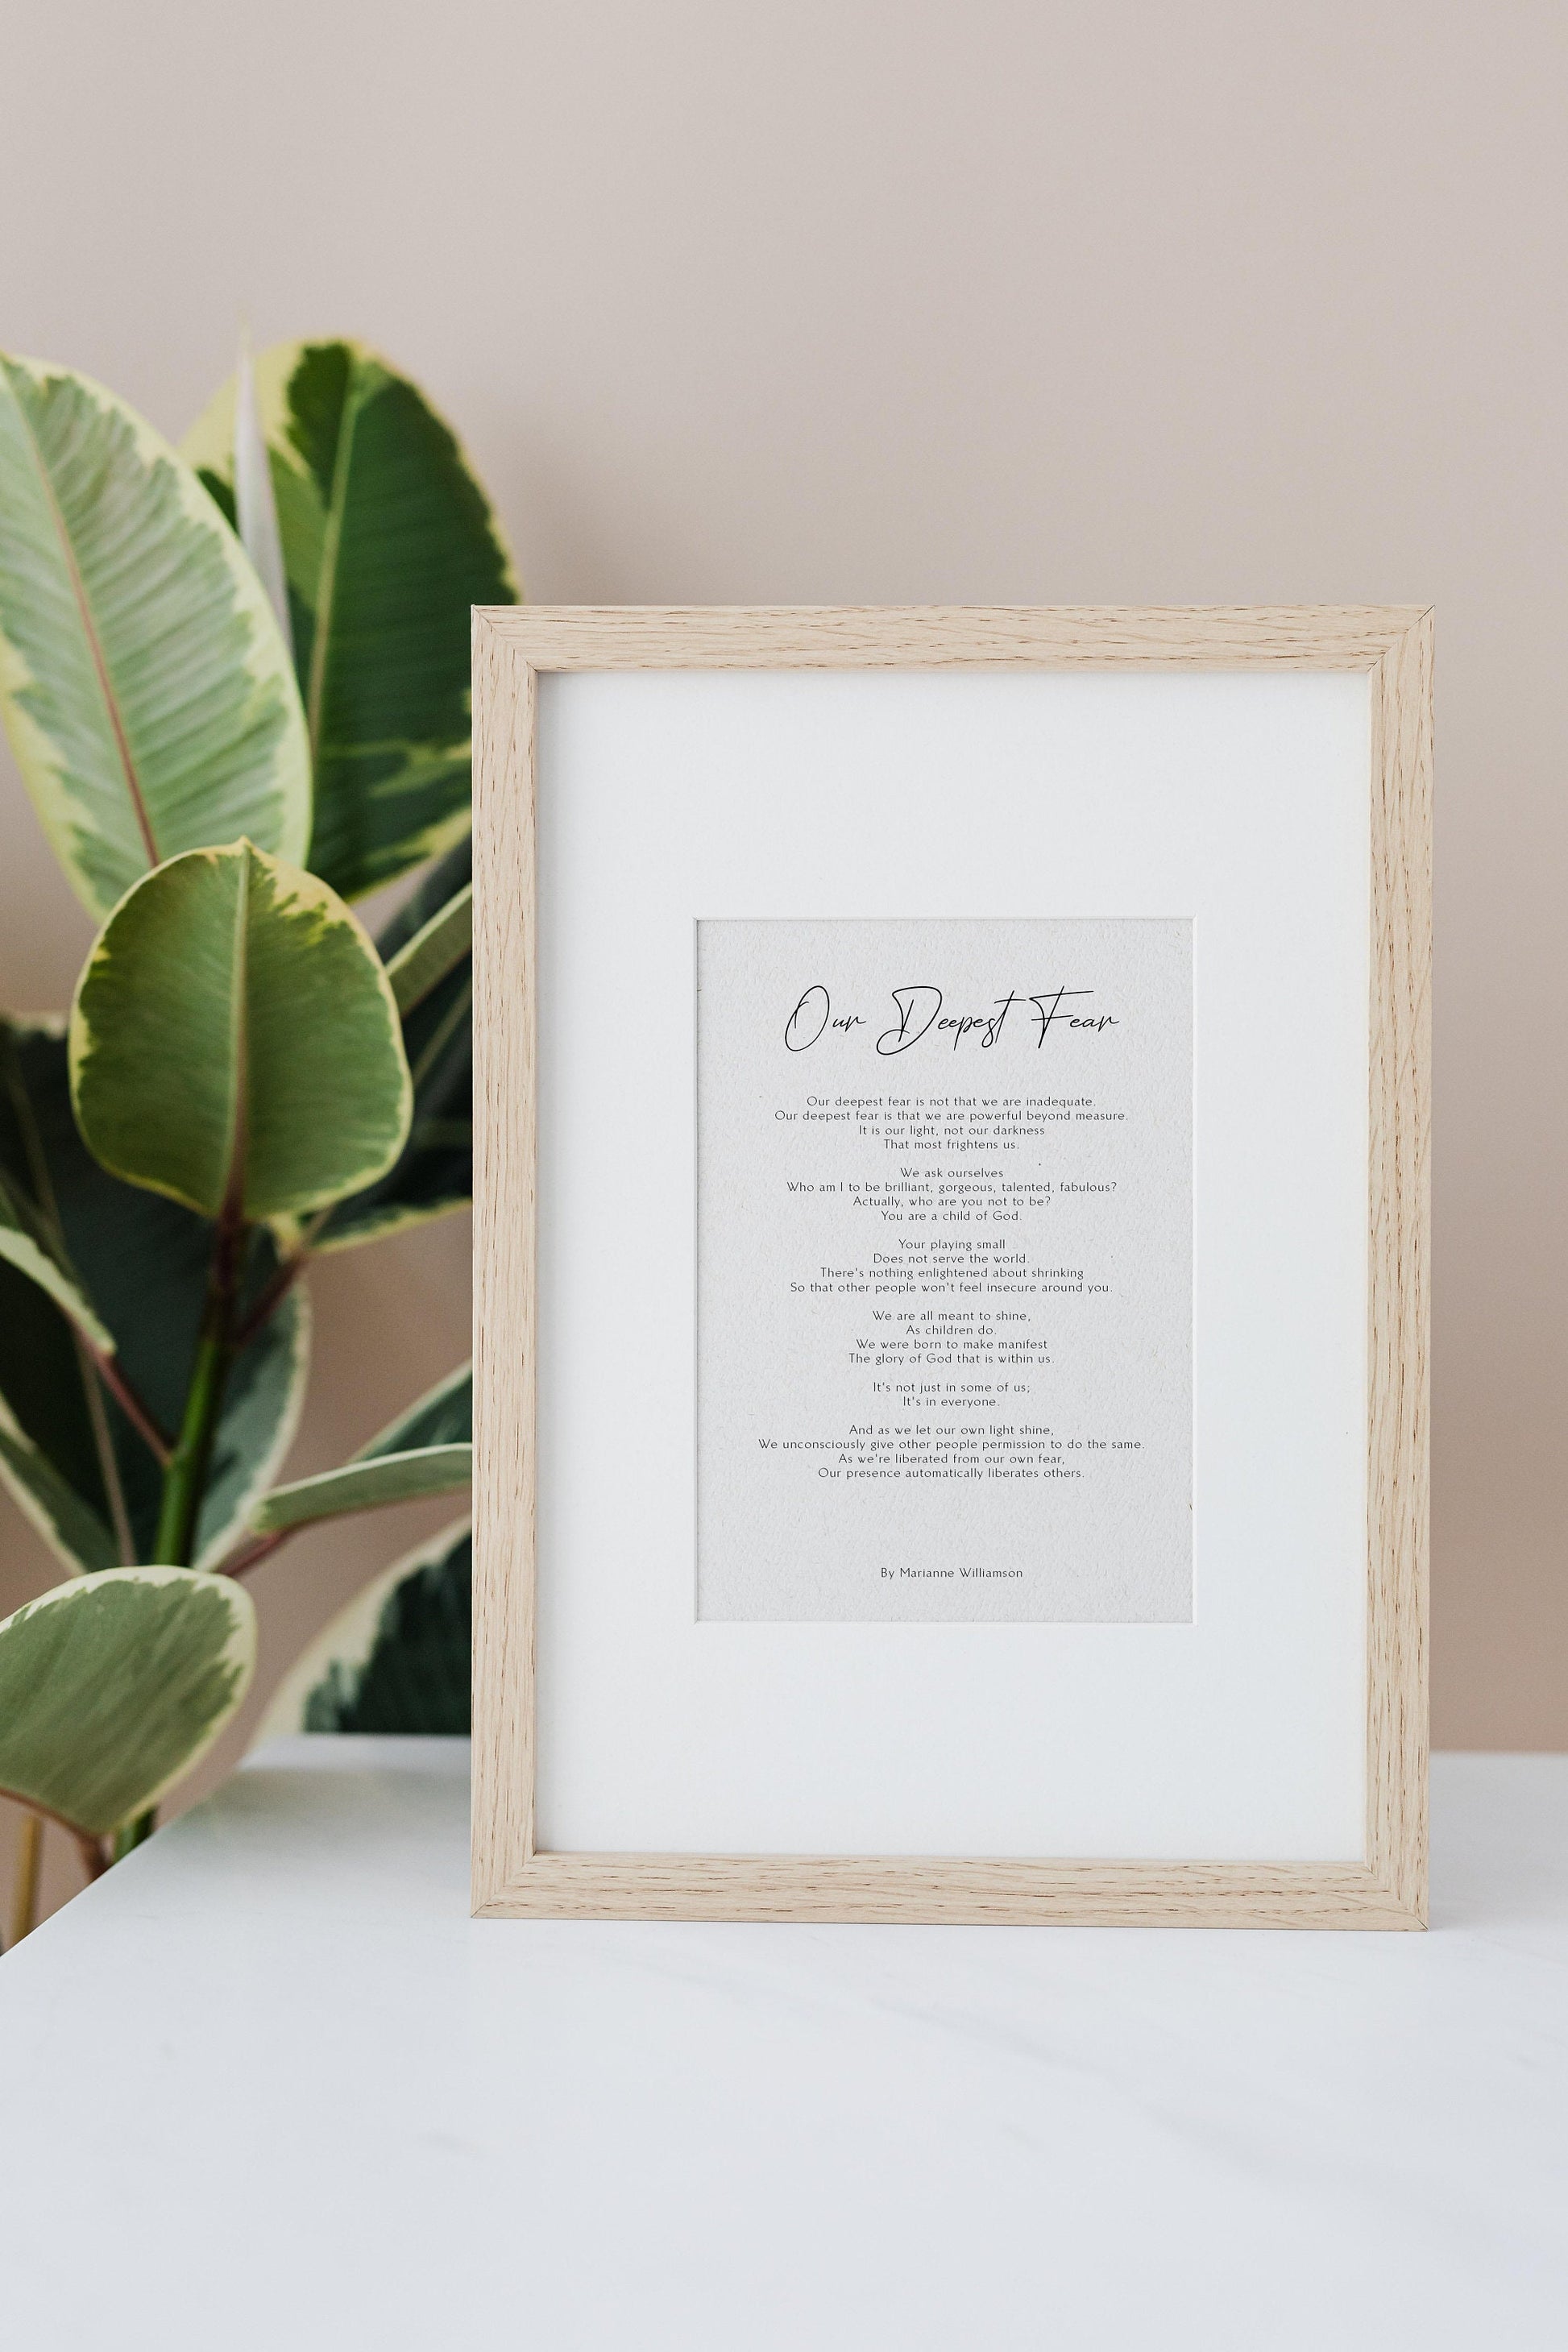 Our deepest fear by Marianne Williamson Framed poem, Marianne Williamson Poem, Framed Calligraphy & Typography Our deepest fear